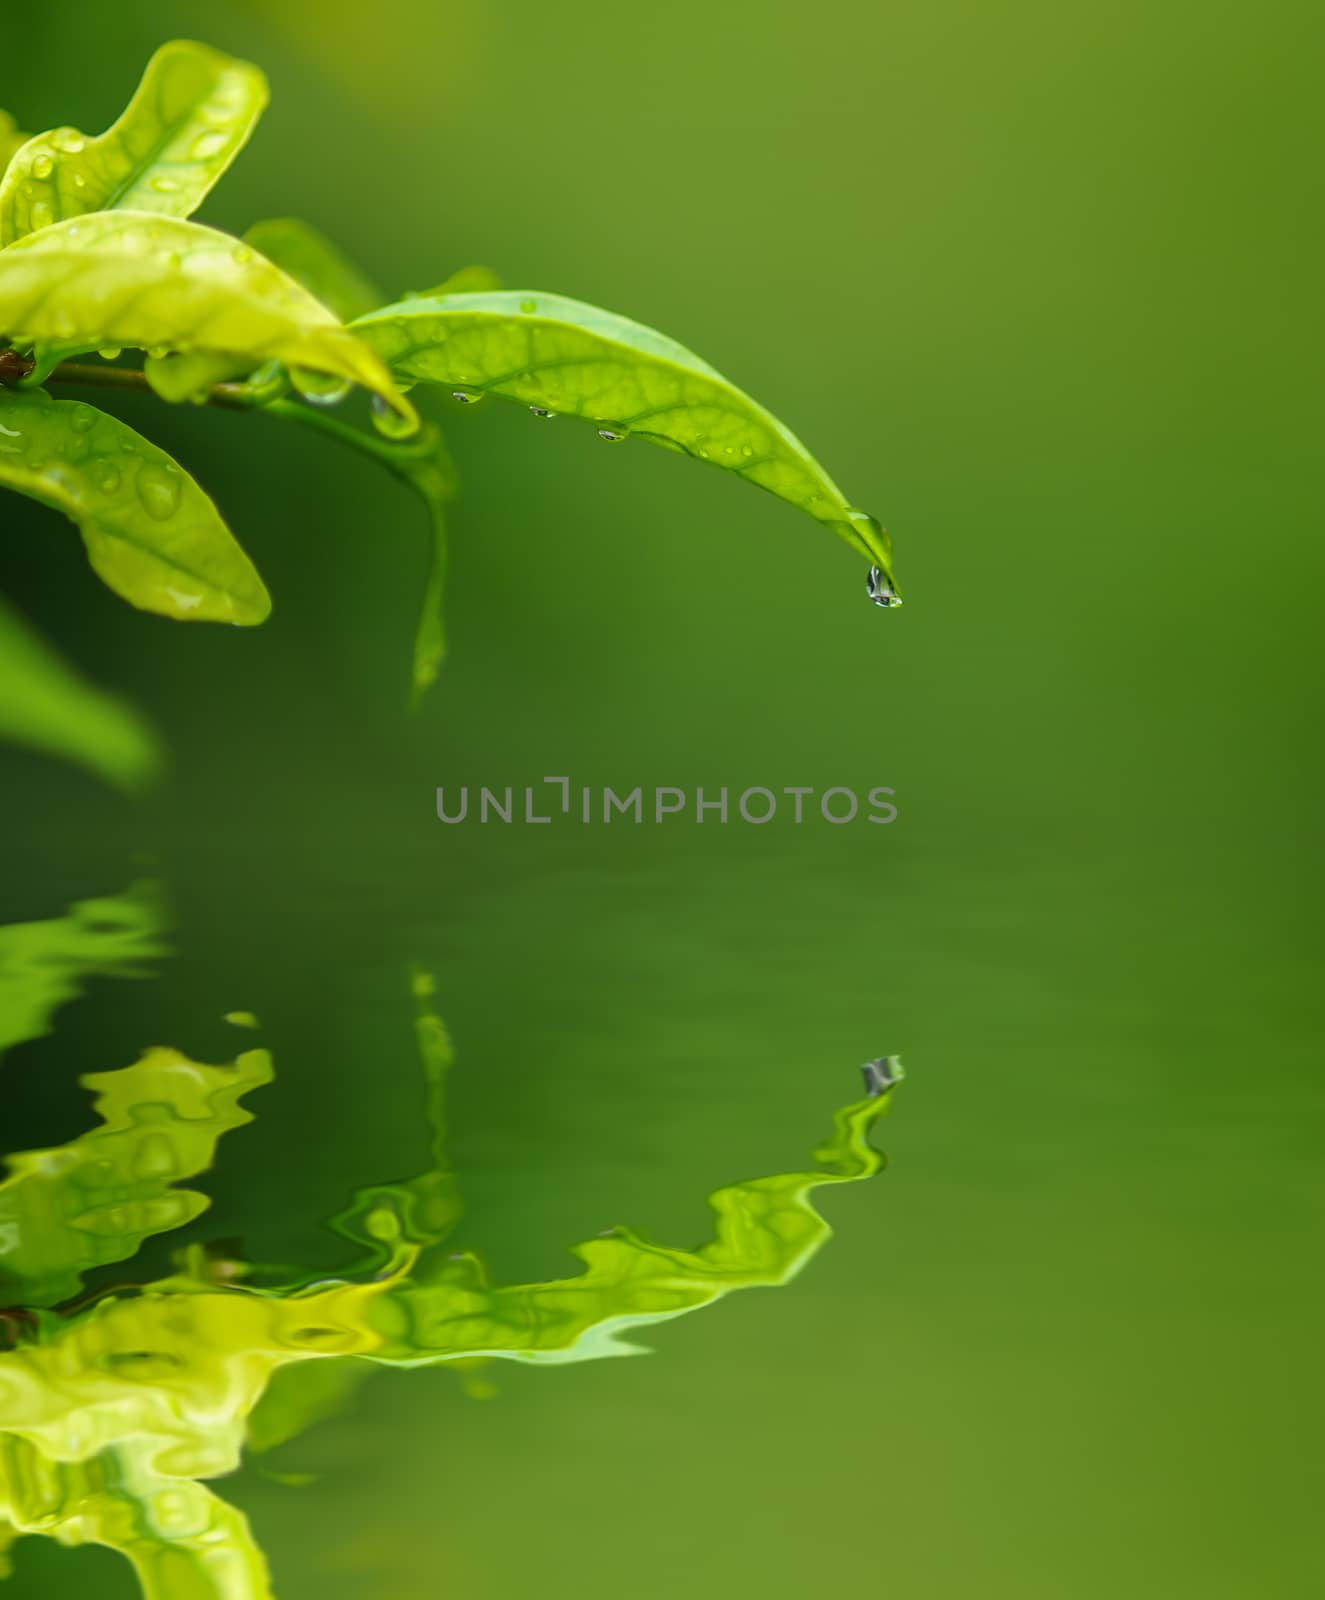 Water drop from green leaf by seksan44